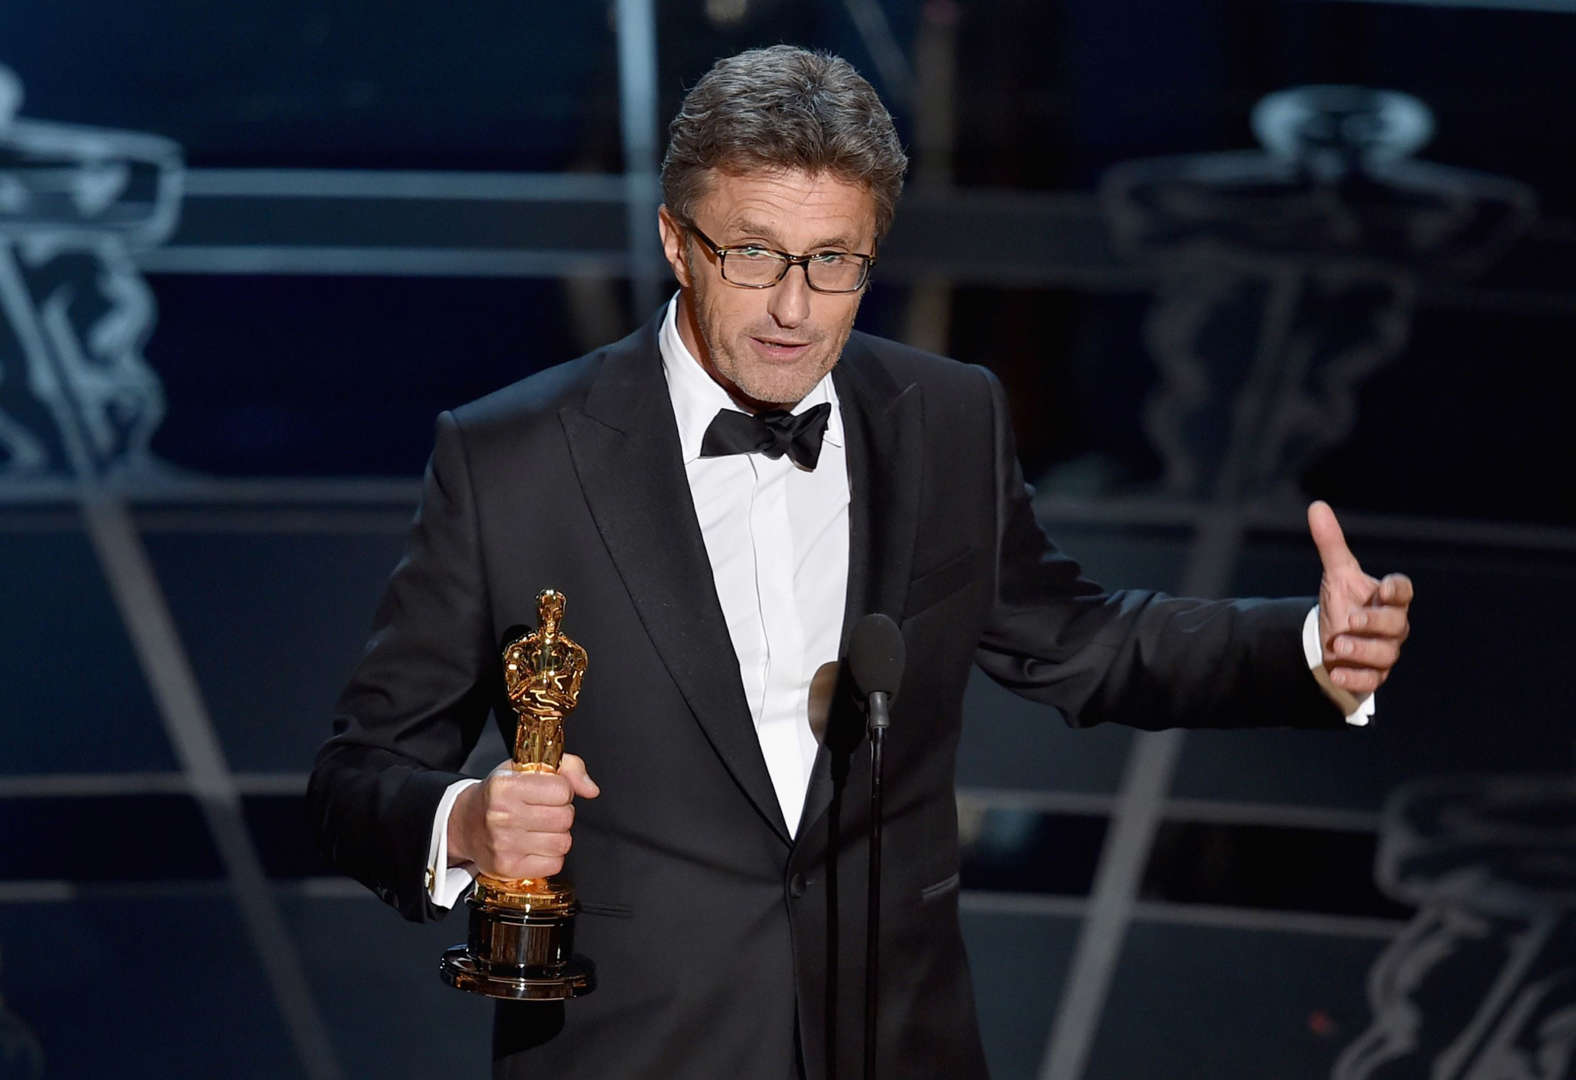 HOLLYWOOD, CA - FEBRUARY 22:  Filmmaker Pawel Pawlikowski accepts the Best Foreign Language Film Award for "Ida" onstage during the 87th Annual Academy Awards at Dolby Theatre on February 22, 2015 in Hollywood, California.  (Photo by Kevin Winter/Getty Images)